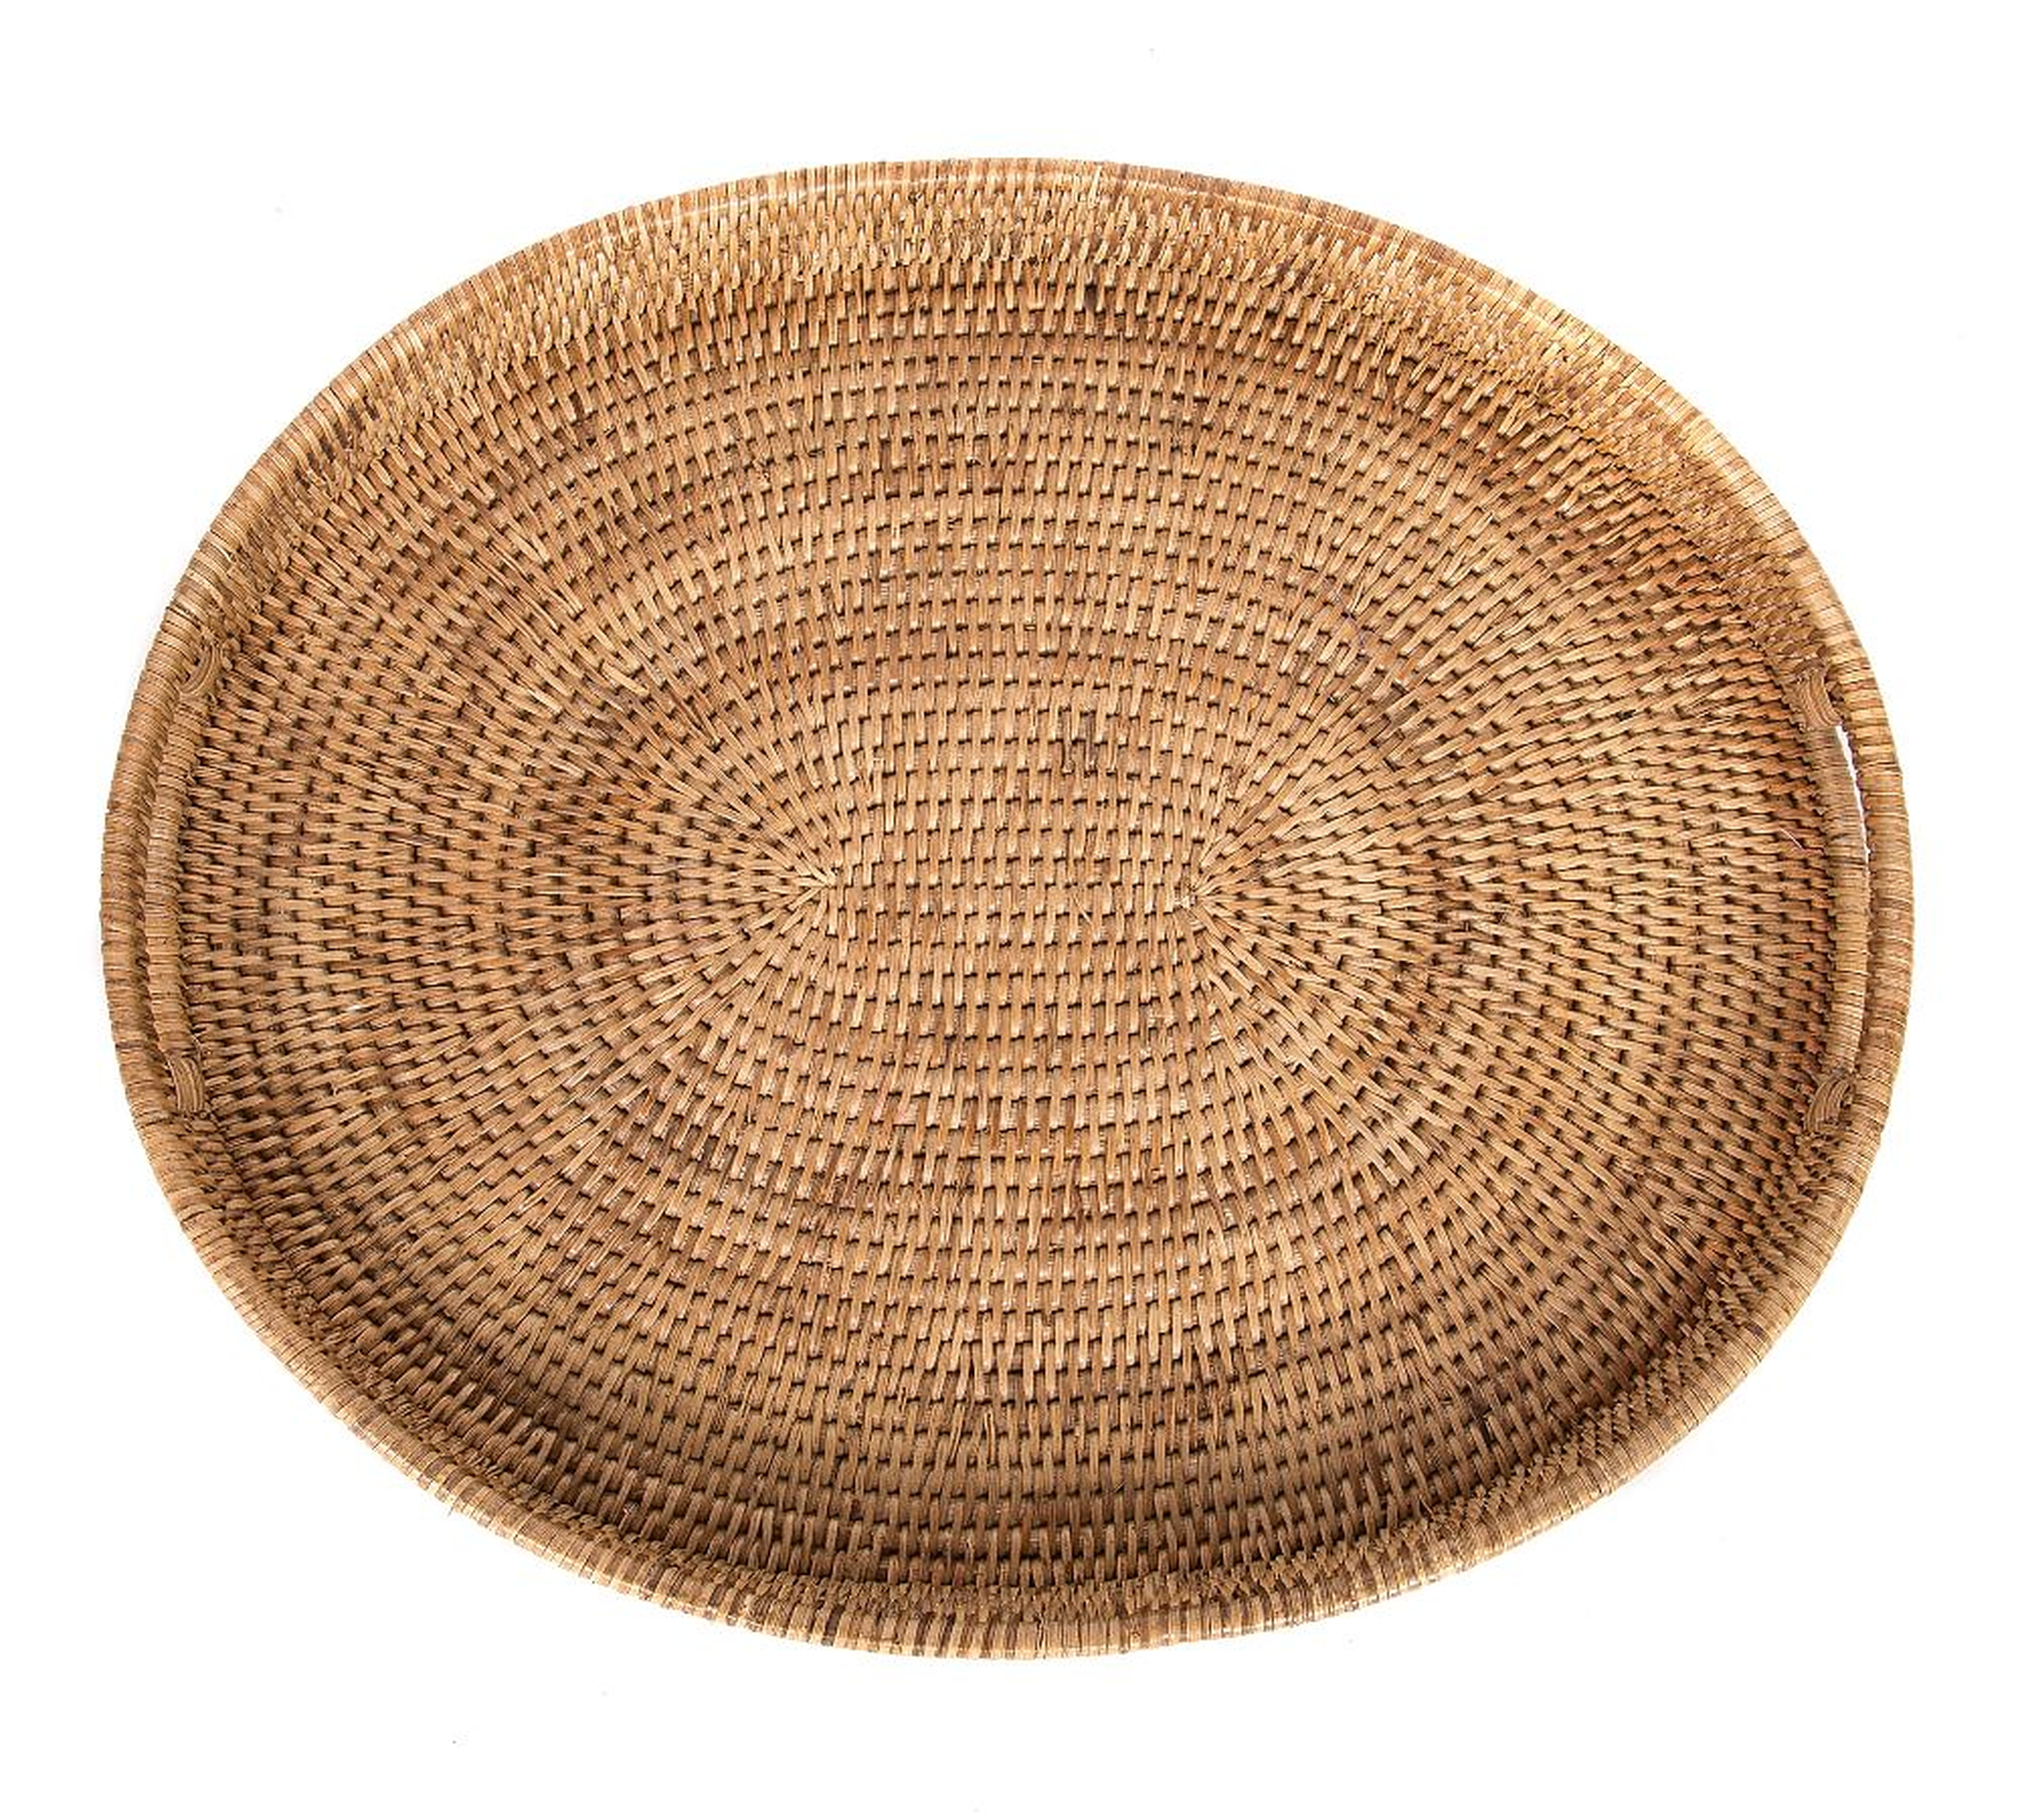 Tava Handwoven Rattan Oval Serving Tray, Natural - Pottery Barn